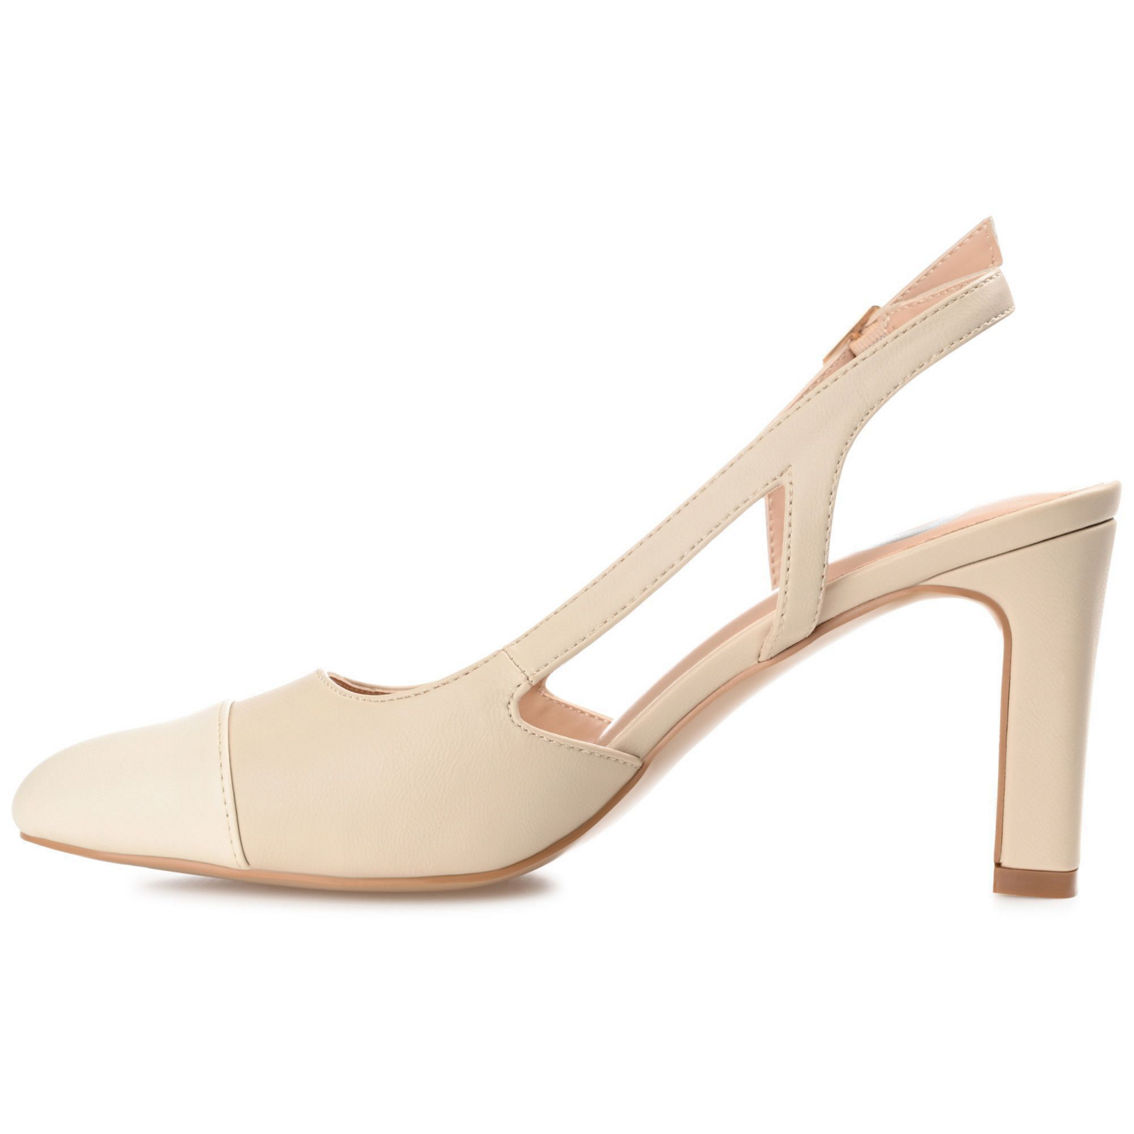 Journee Collection Women's Reignn Medium and Wide Width Pump - Image 4 of 5